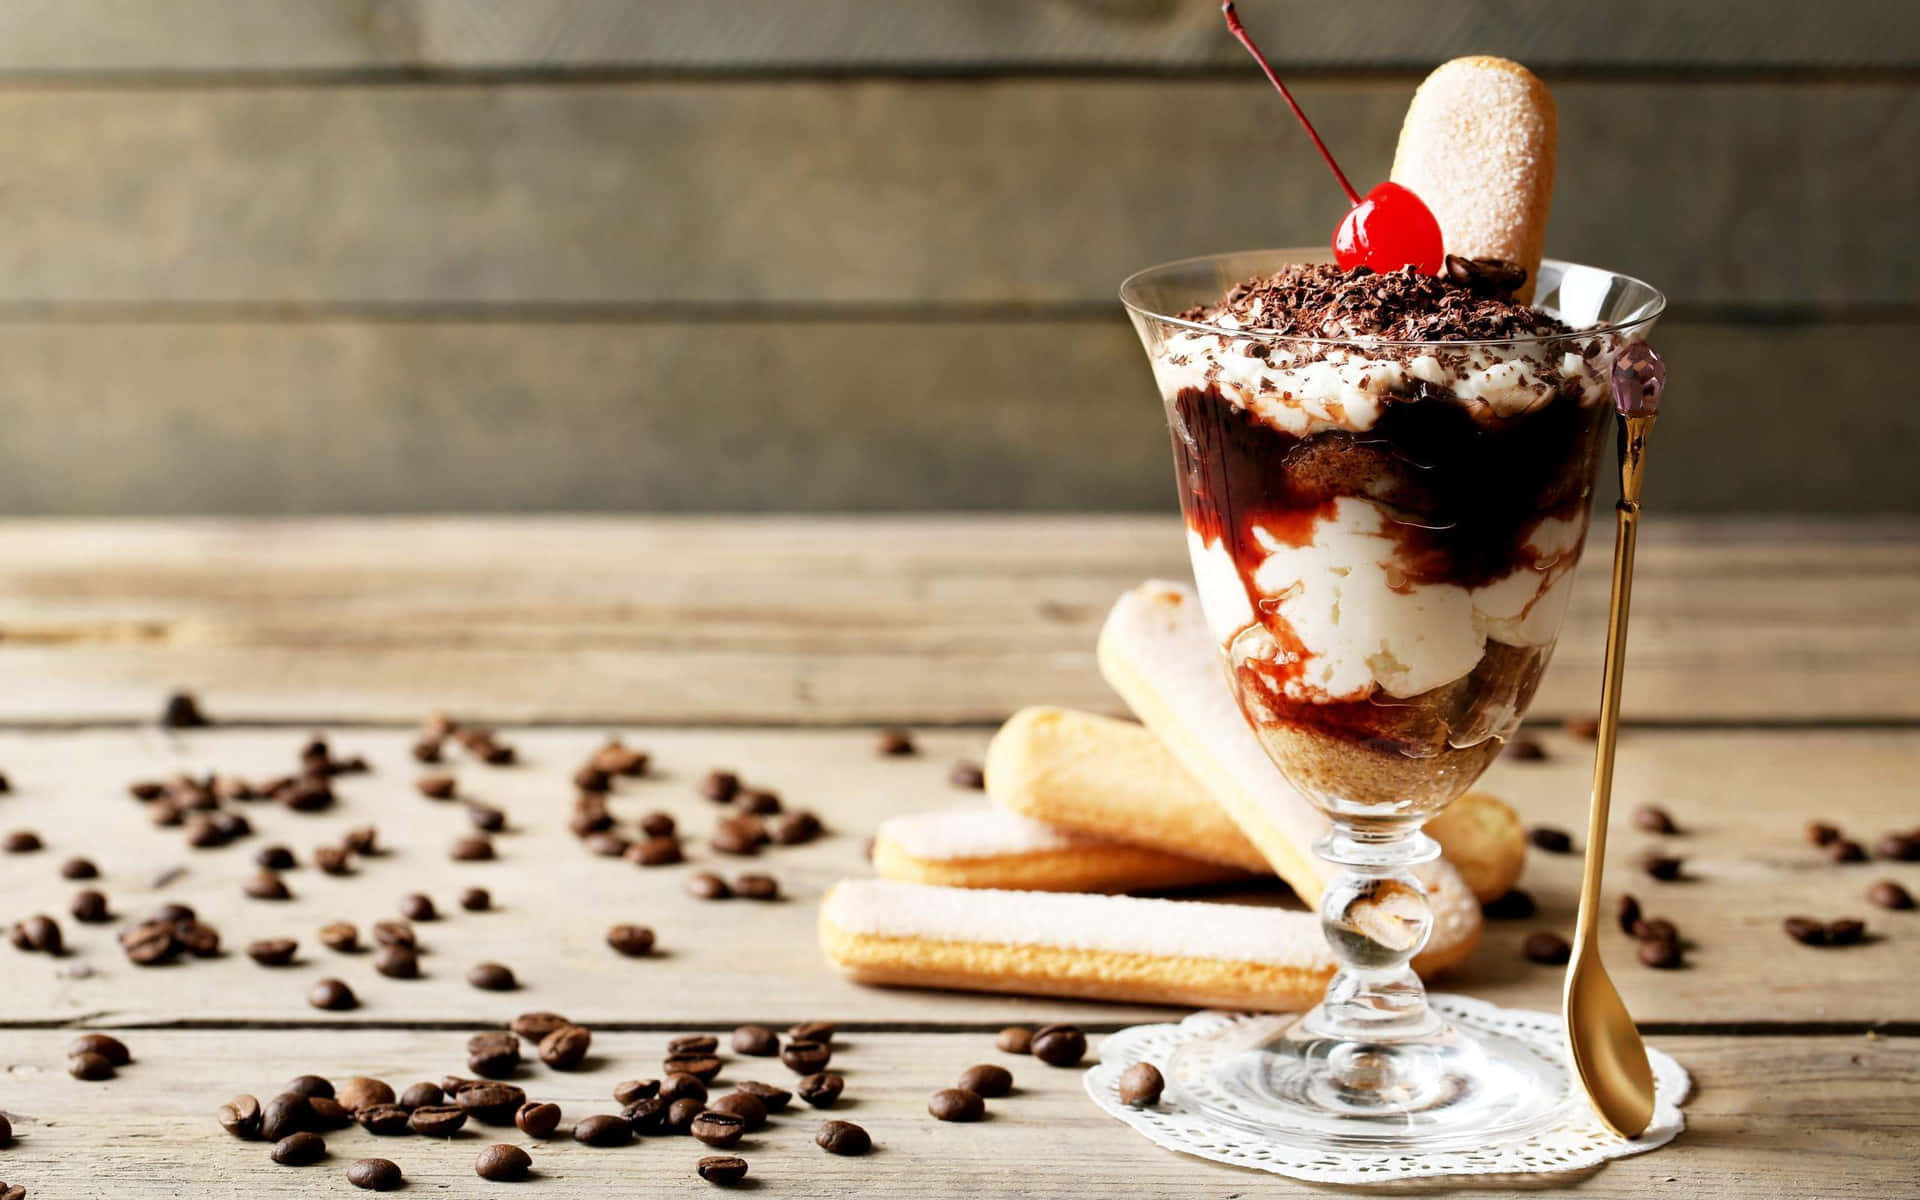 A Glass Of Ice Cream With Chocolate And Cherries